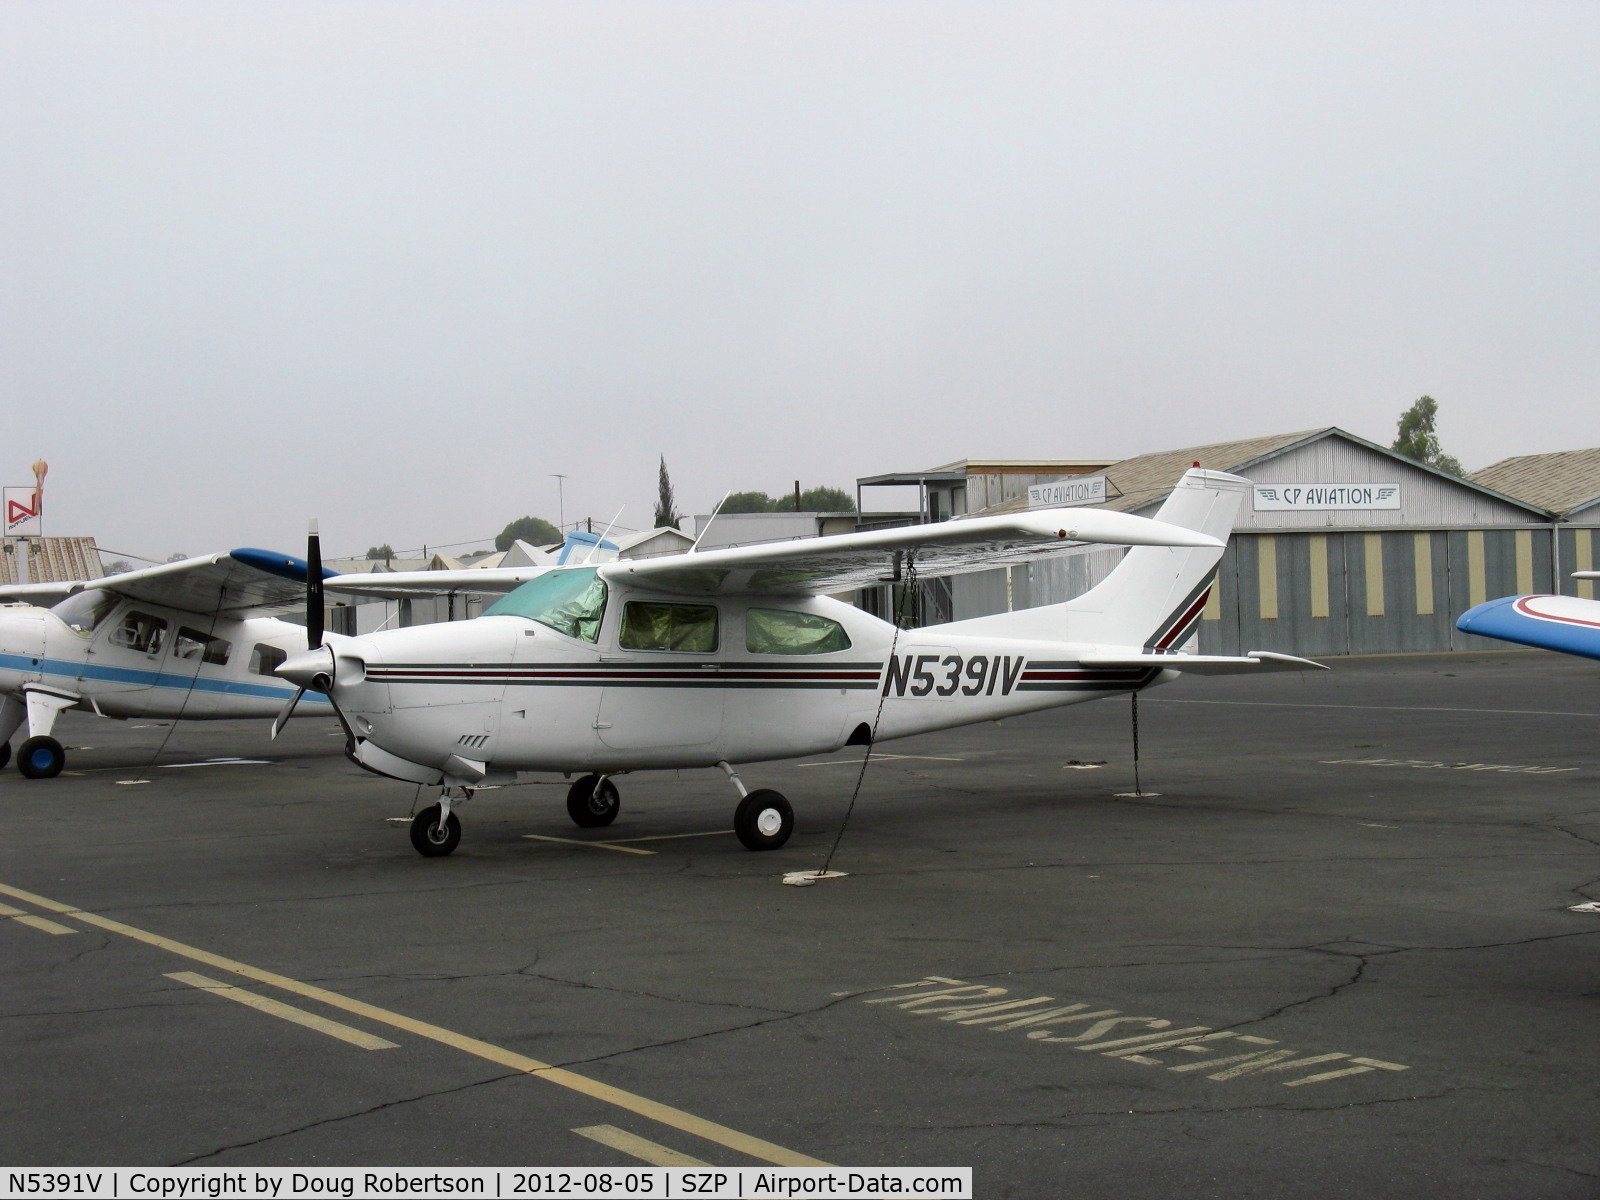 N5391V, 1975 Cessna T210L Turbo Centurion C/N 21060926, 1975 Cessna T210L TURBO CENTURION, Continental TSIO-520-R 310 Hp, in the early morning gloom